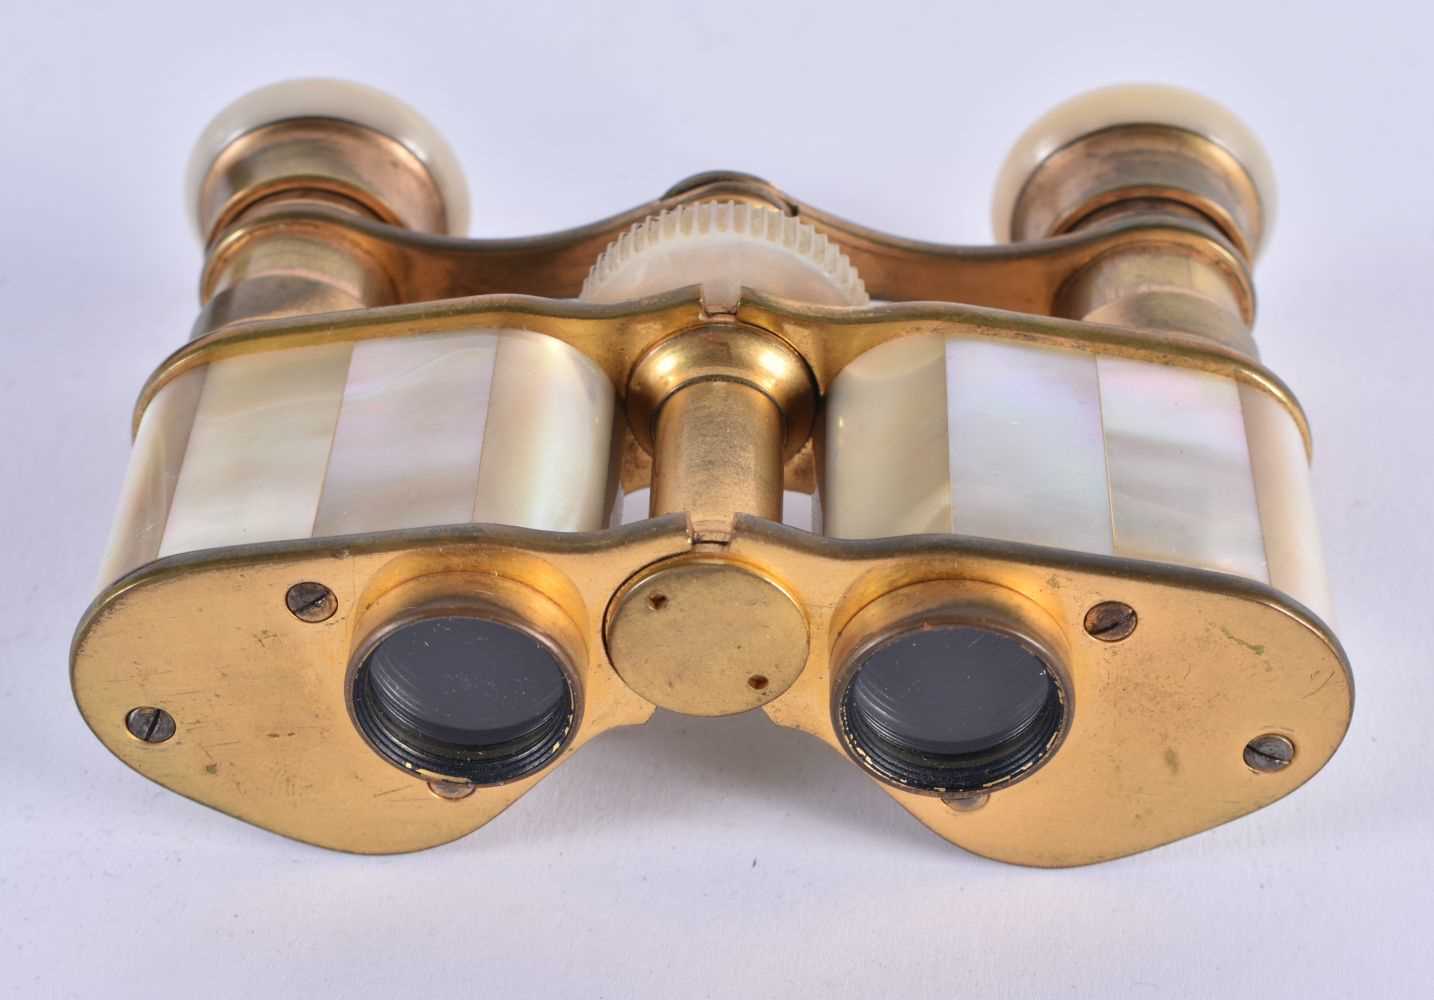 A PAIR OF MOTHER OF PEARL OPERA GLASSES. 9 cm x 8 cm extended. - Image 2 of 5